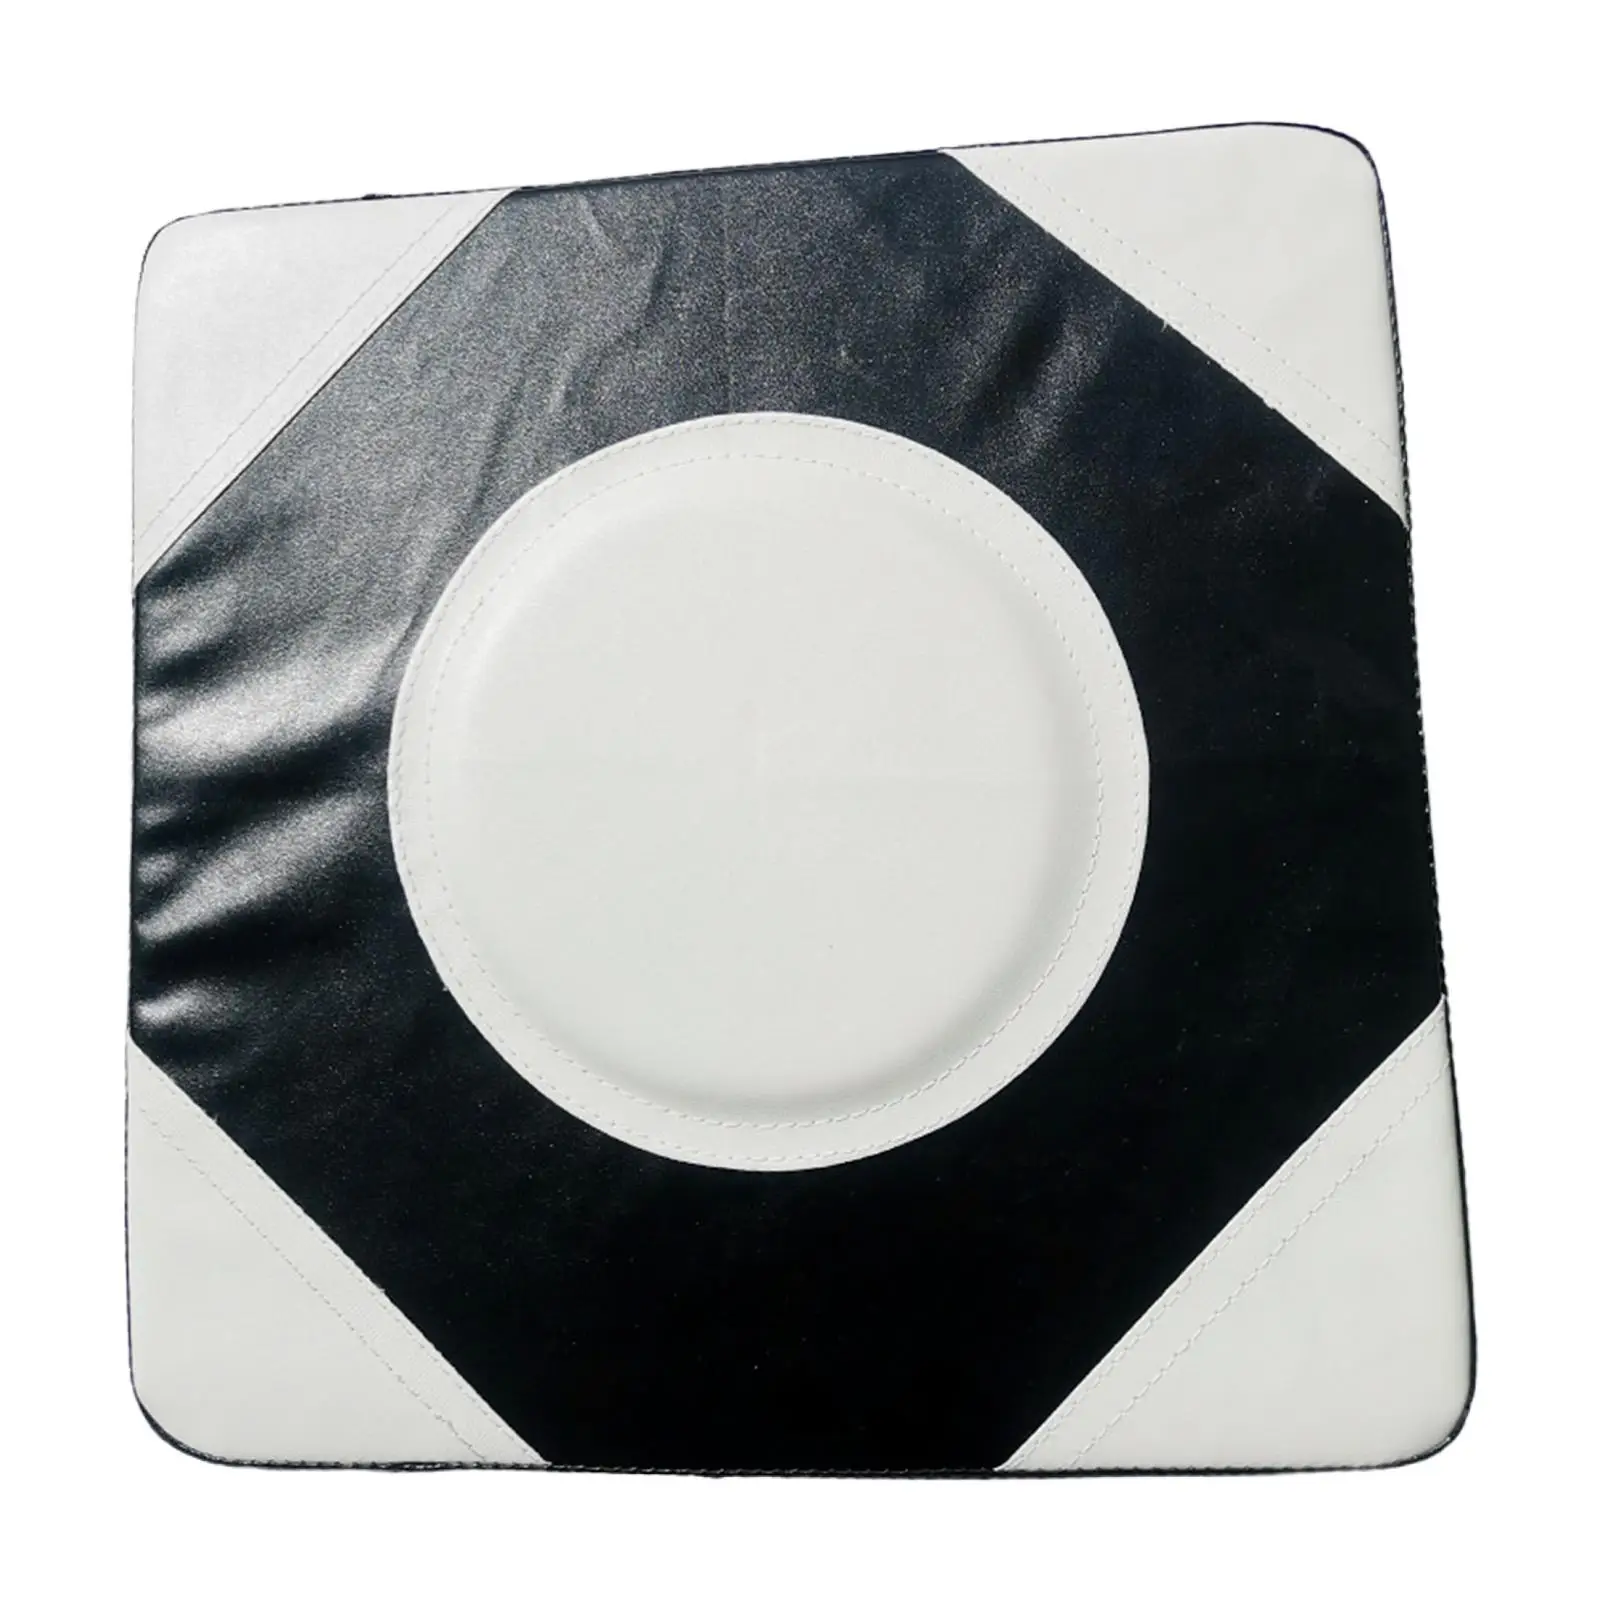 Wall Focus Target Punch Practice Equipment Fighting Pad for Training Pads